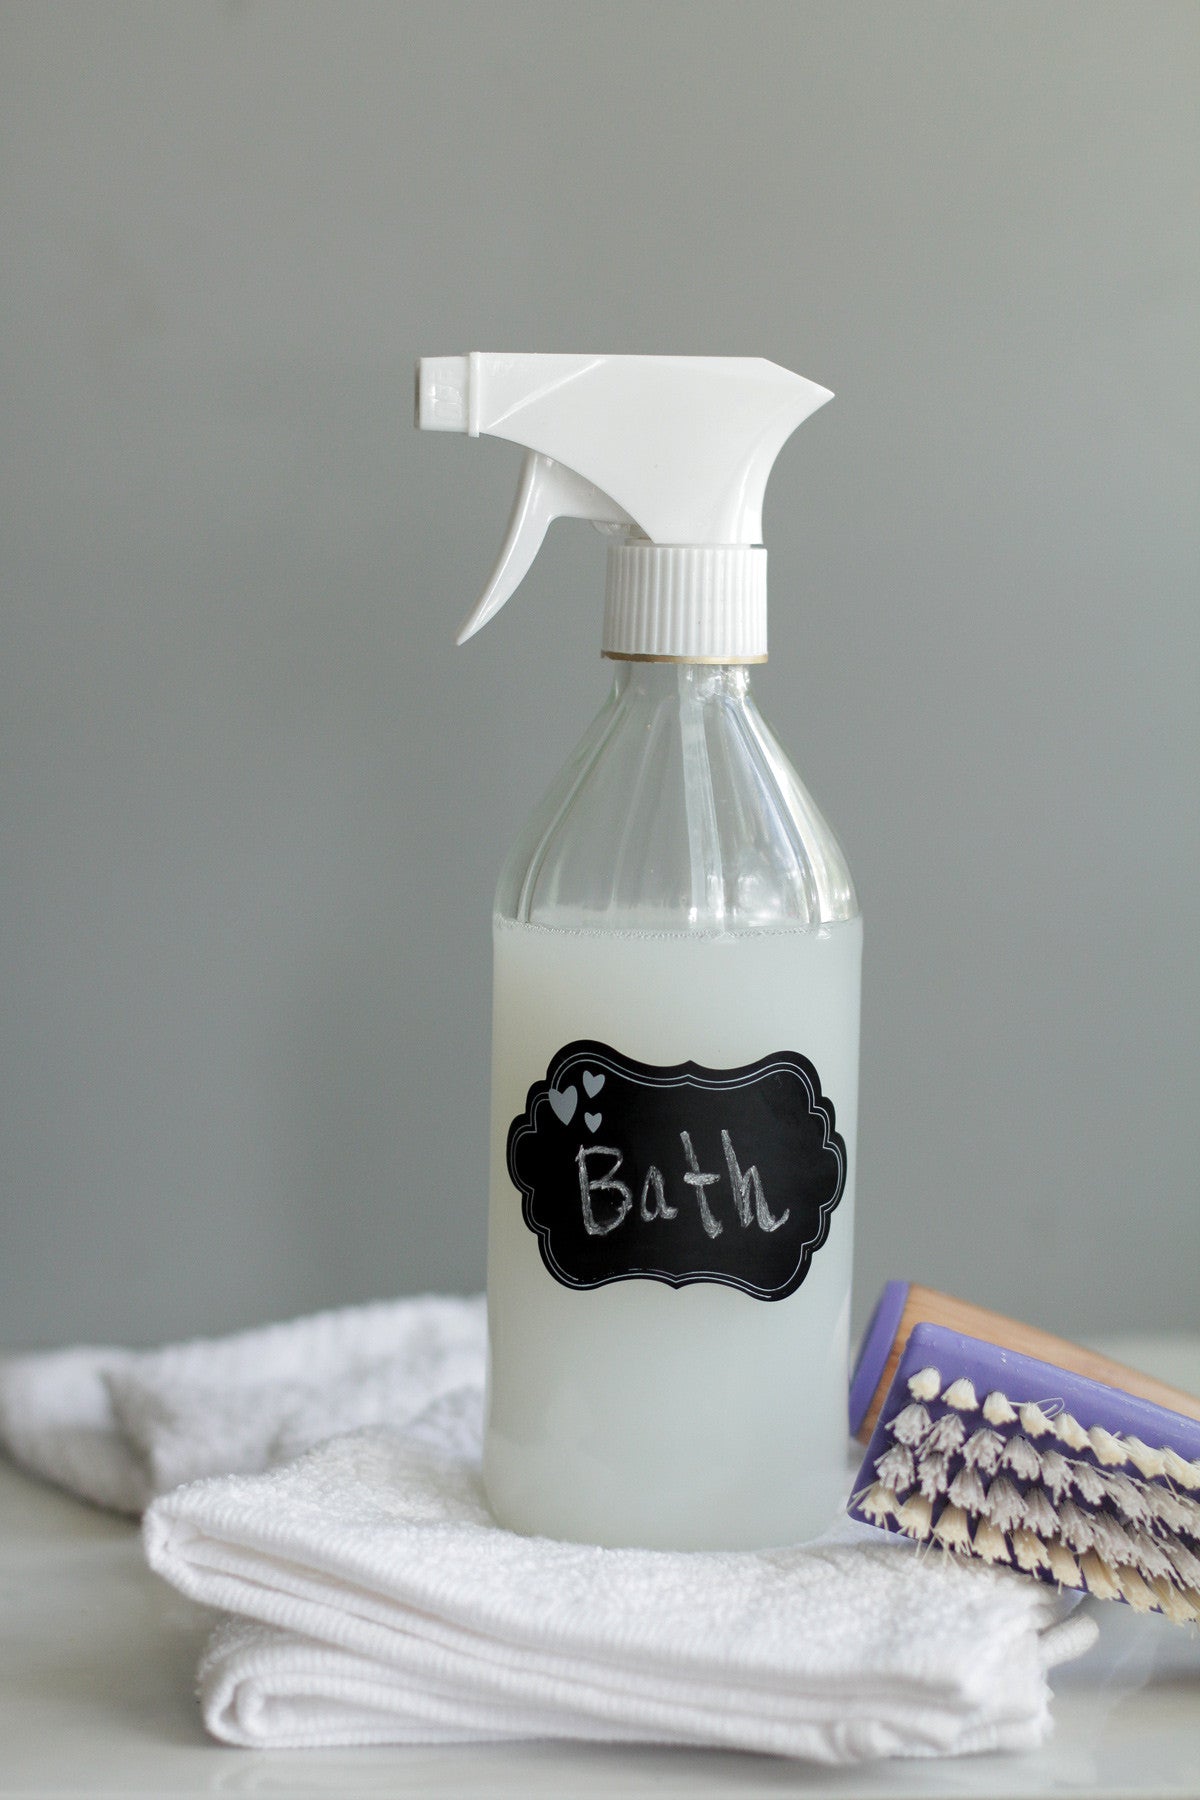 All Natural Home :: Liquid Soaps, Detergents and Sprays